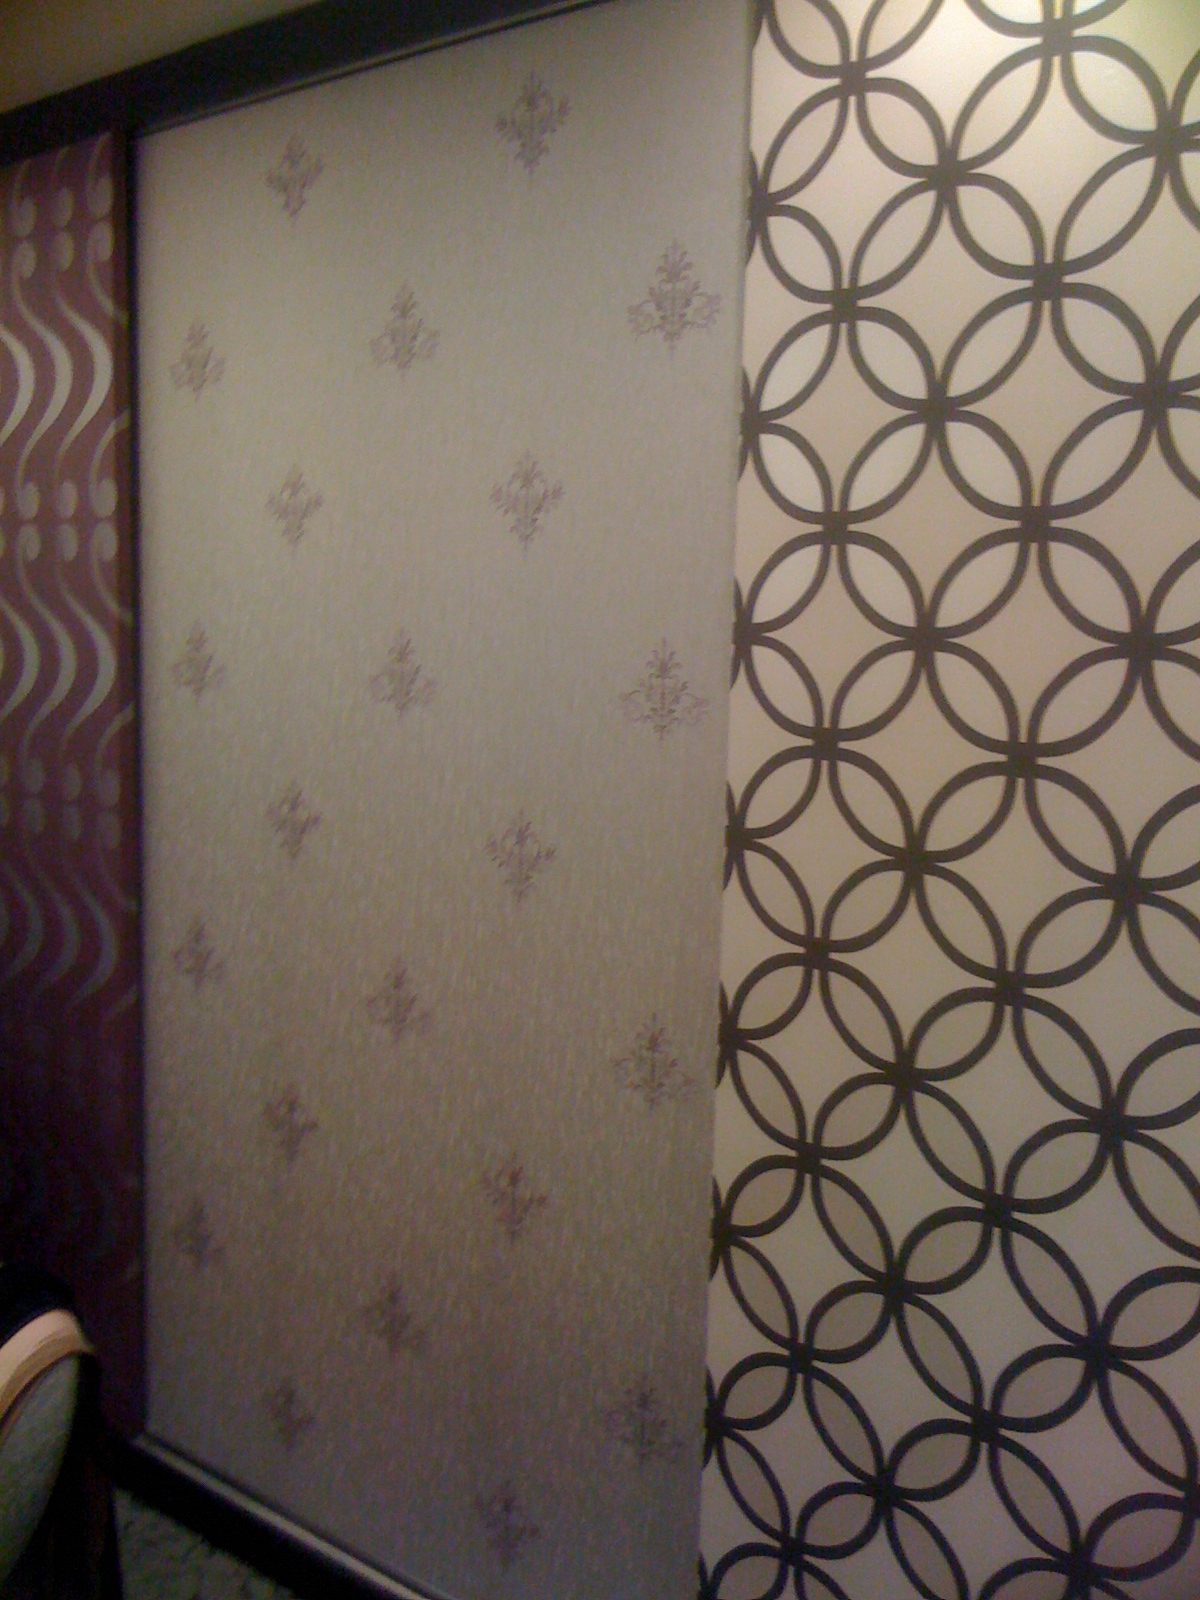 WALLPAPER AKMACOLLECTION: WALLPAPER BY AKMACOLLECTION